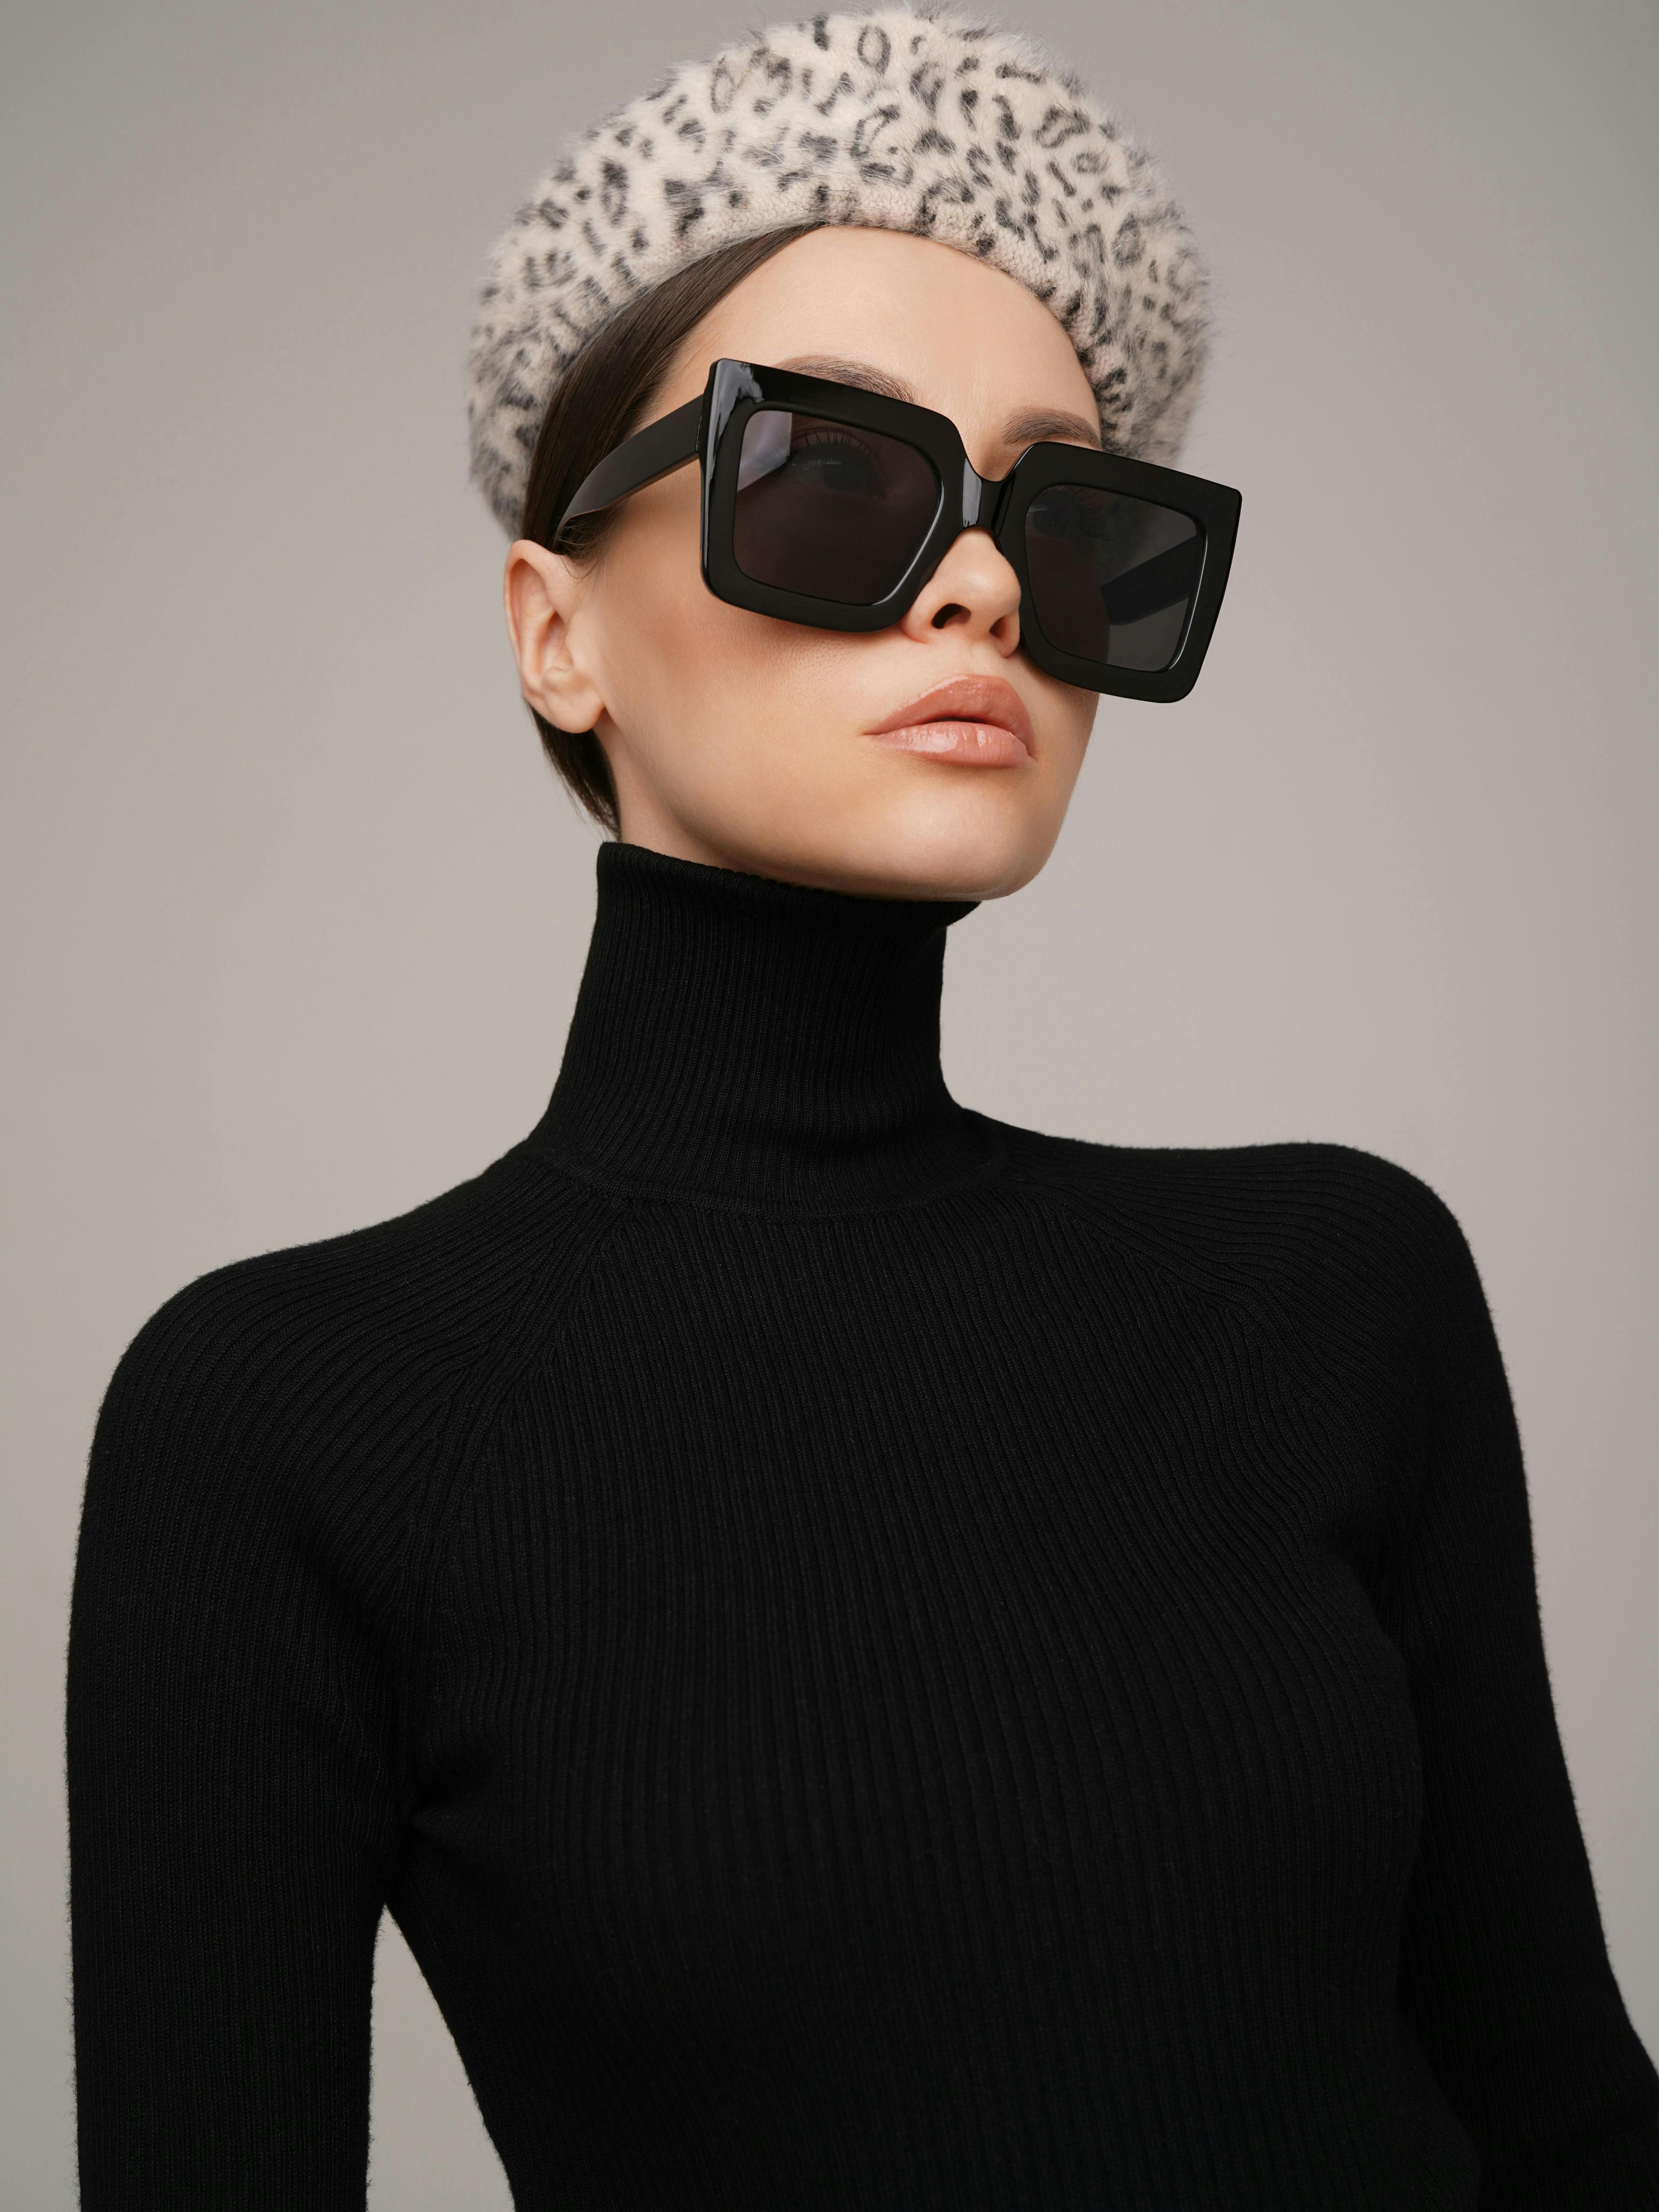 shoulders,studio,leopard print,woman,beauty,young,catalog,classical,slim,wear,fashionista,spring,beautiful,cap,outfit,trendy,look book,casual,femininity,season,hat,model,roll-neck,female,elegant,sunglasses,sensual,sexy,black,beret,collection,girl,neck,portrait,people,comfort,turtleneck,lifestyle,slender,background,person,lady,clothing,style,autumn,posing,fashion